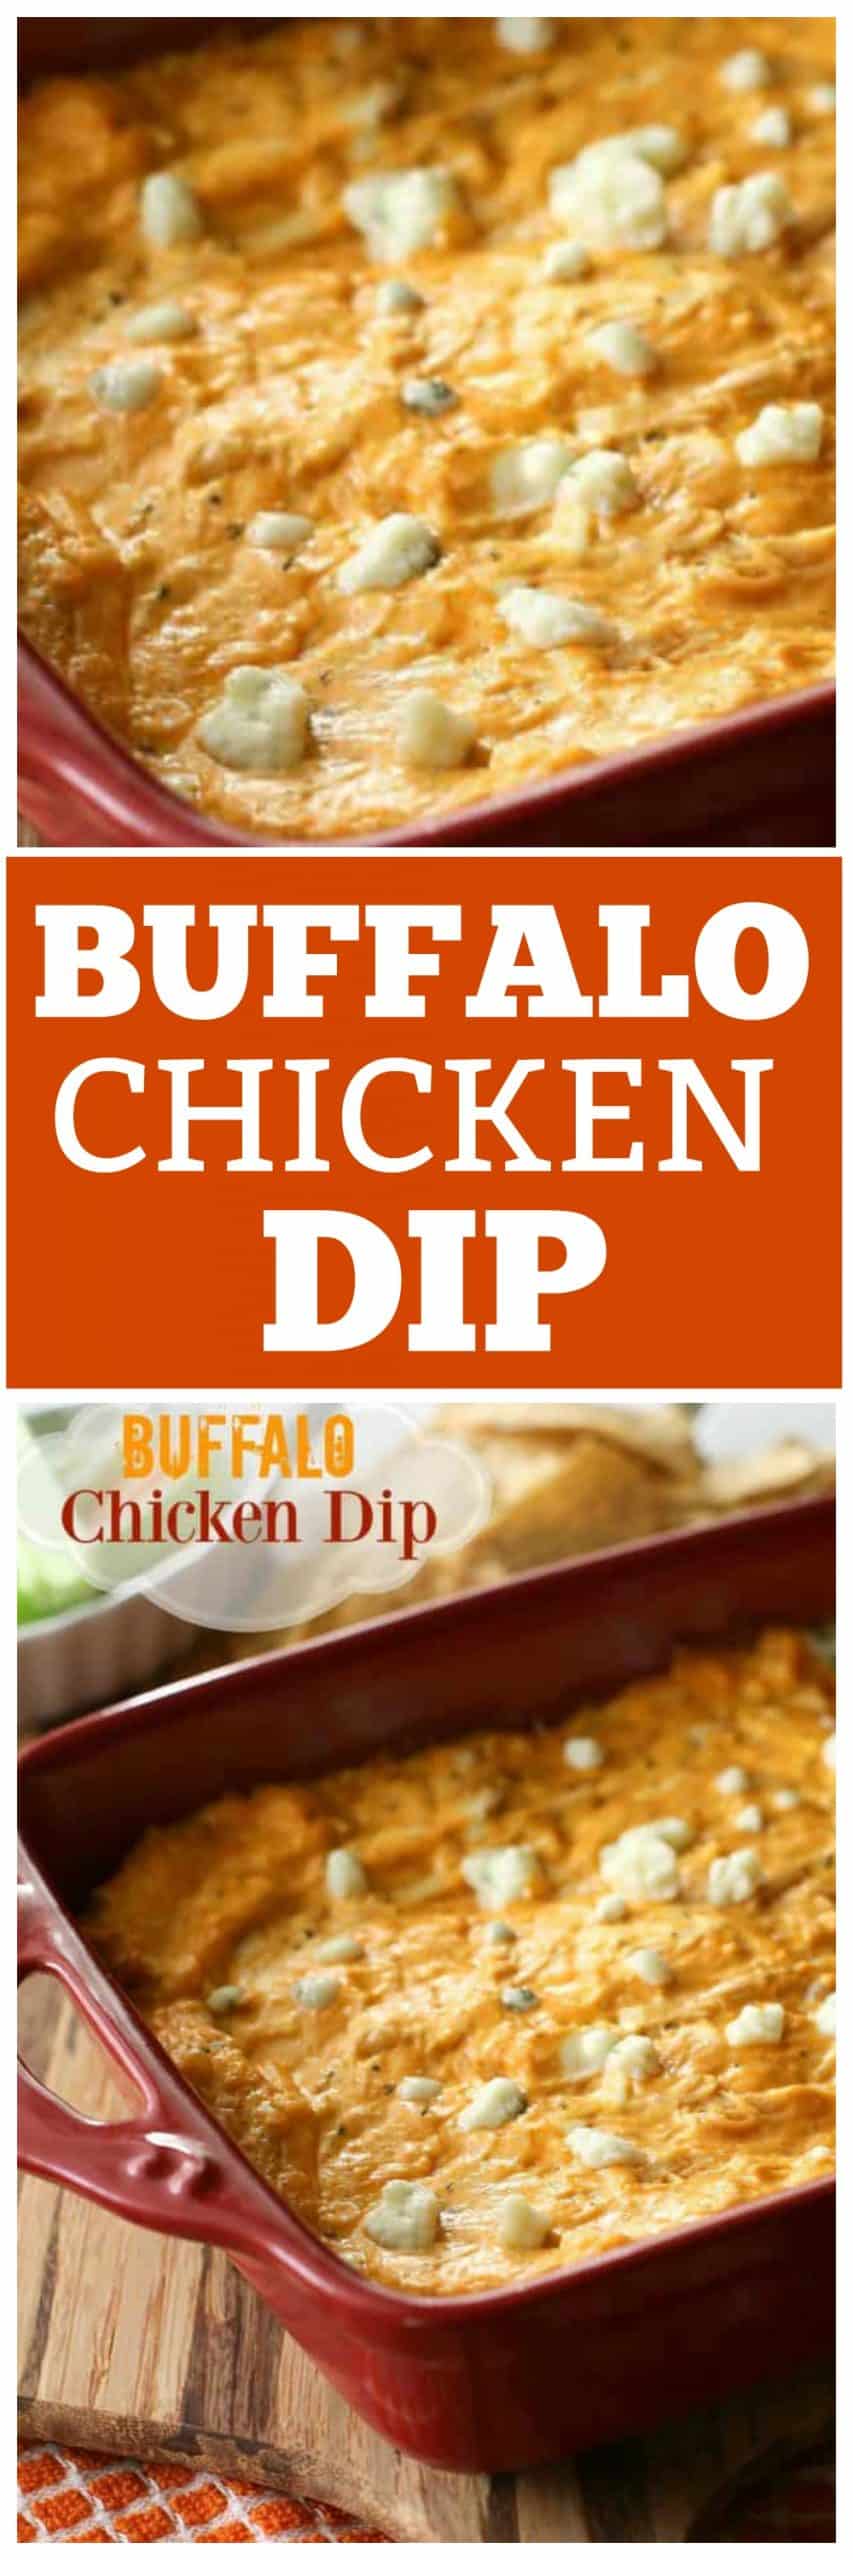 Buffalo Chicken Dip Recipe (+VIDEO) - The Girl Who Ate Everything